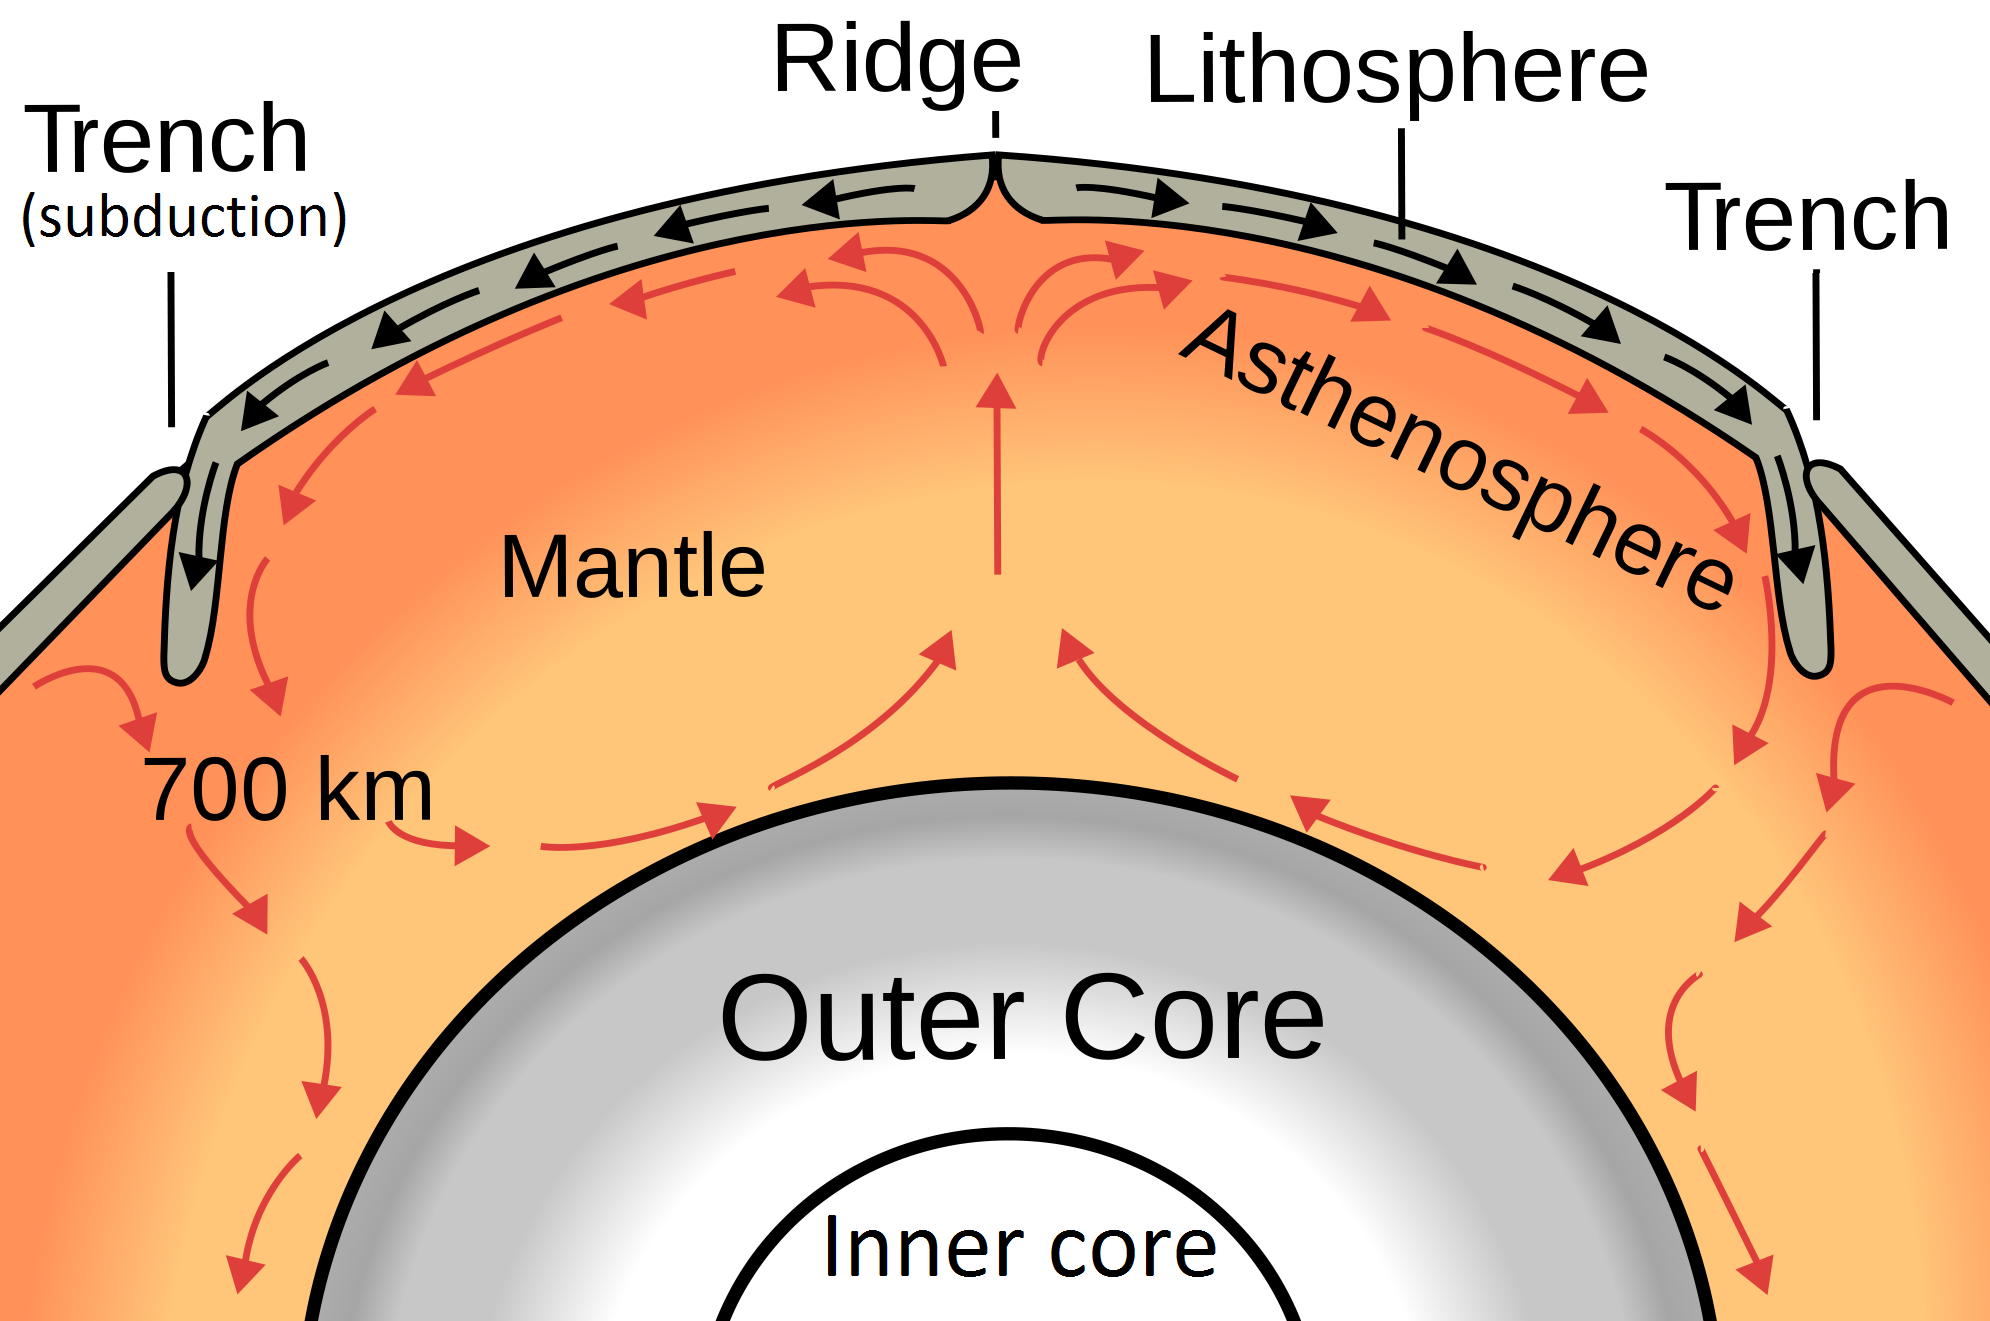 The movement of currents in the Earth's mantle puts pressure on the Lithosphere are causes plates to move